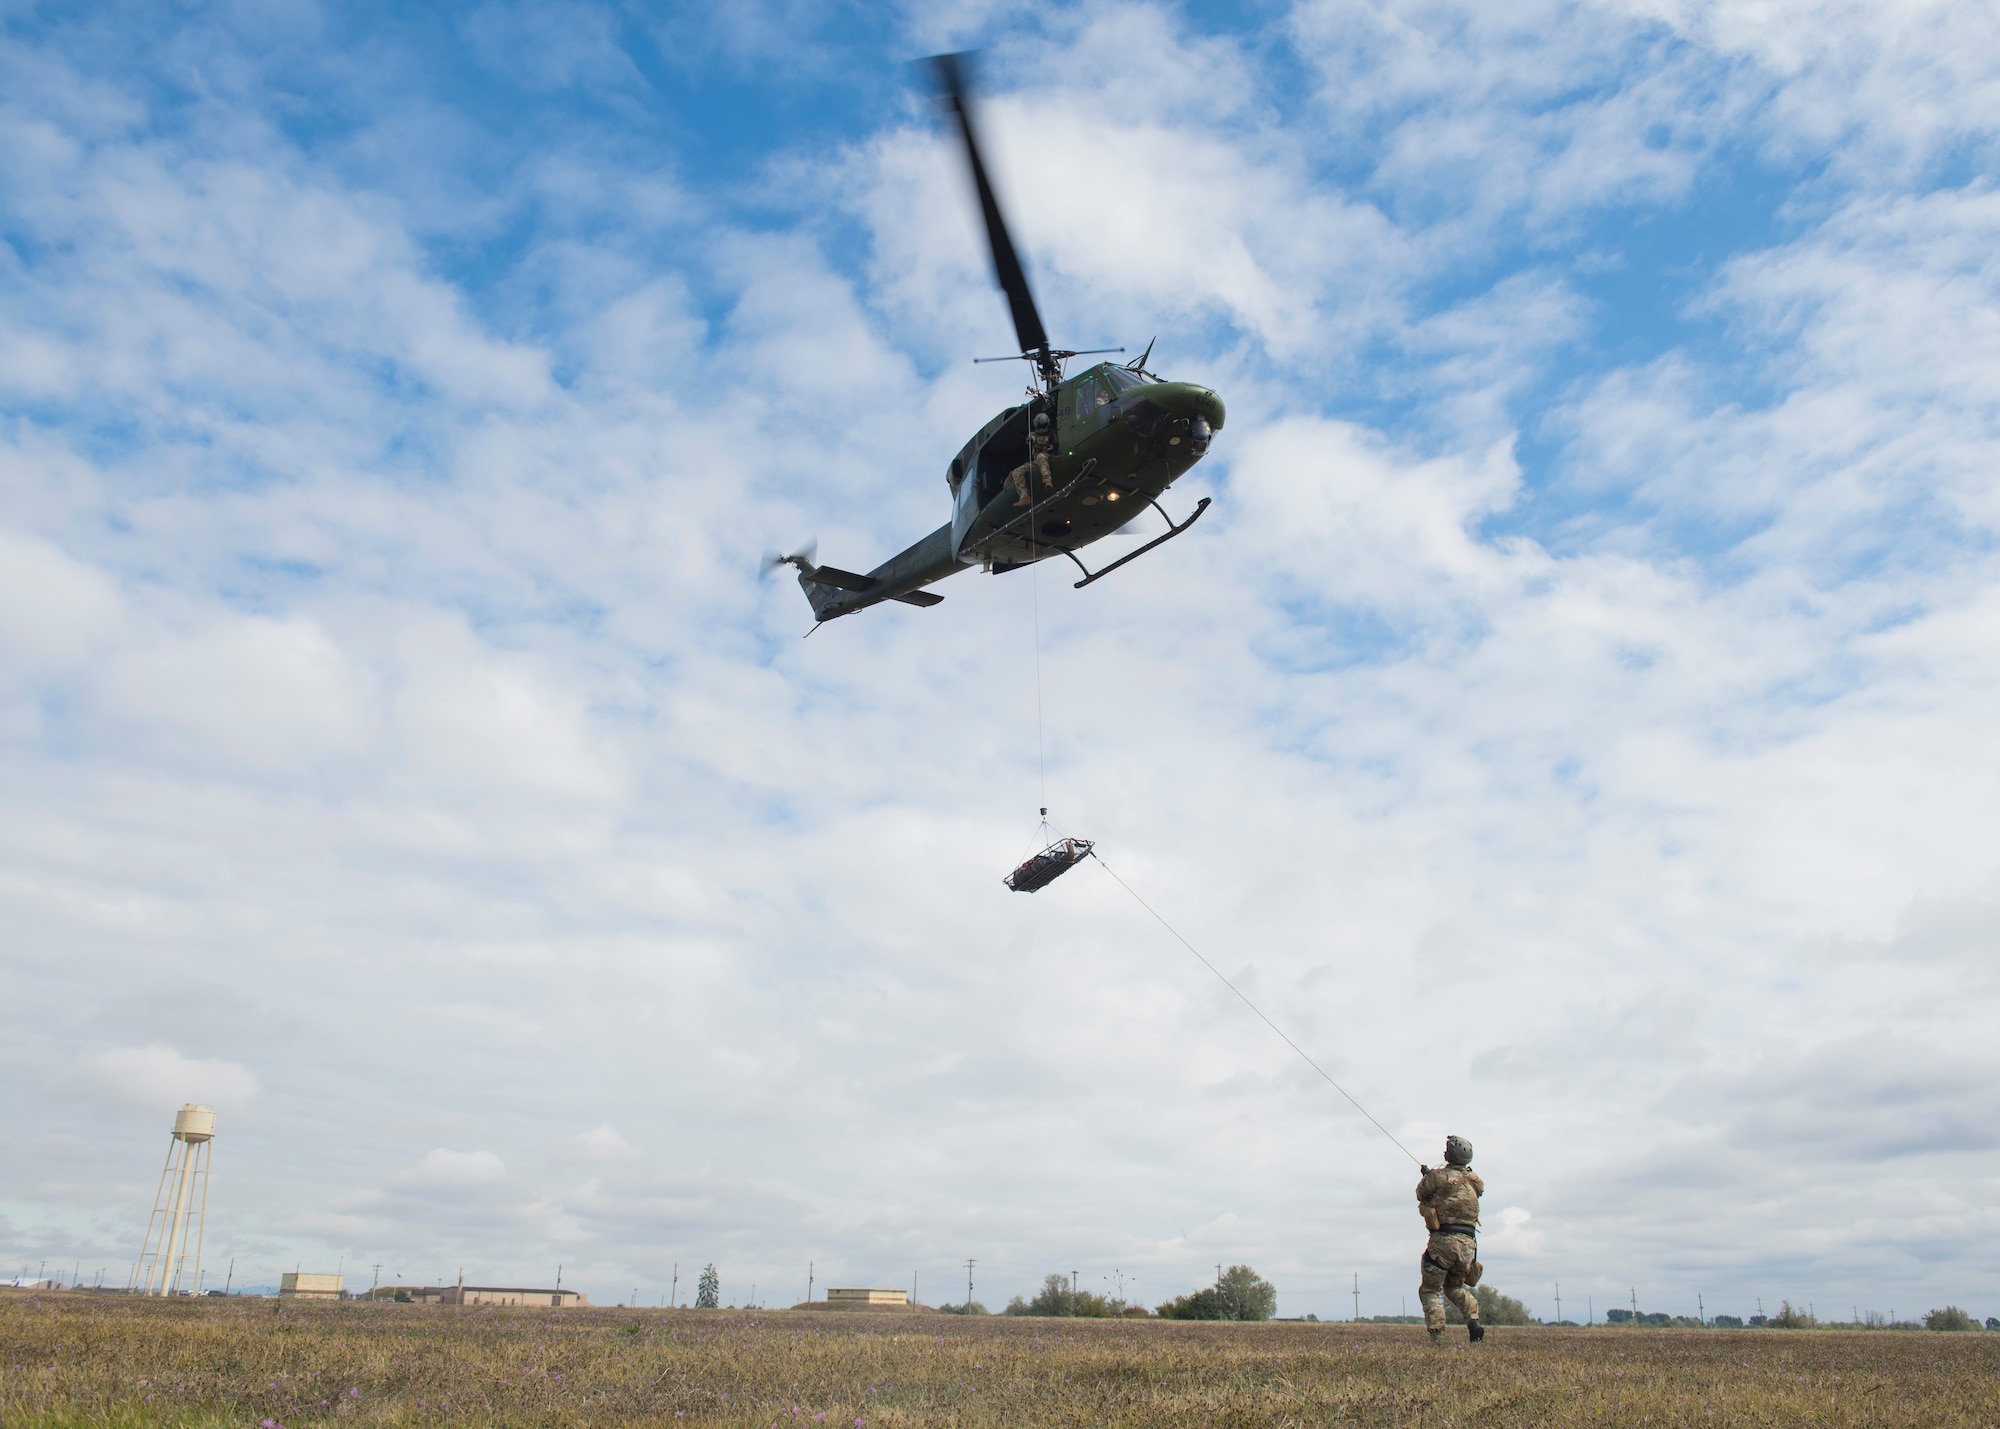 U.S. Air Force Tech. Sgt. James Pennington, 336th Training Group independent medical technician, and members from the 36th Rescue Squadron perform a rescue demonstration prior to the commemoration ceremony of the 36th RQS reaching 700 saves at Fairchild Air Force Base, Washington, Sept. 20, 2019. The 36th RQS is the only operational rescue squadron flying UH-1N helicopters within the United States that is qualified to perform 24-hour medical evacuation alert, water rescue, cargo sling and hoist operations. (U.S. Air Force photo by Airman 1st Class Lawrence Sena)